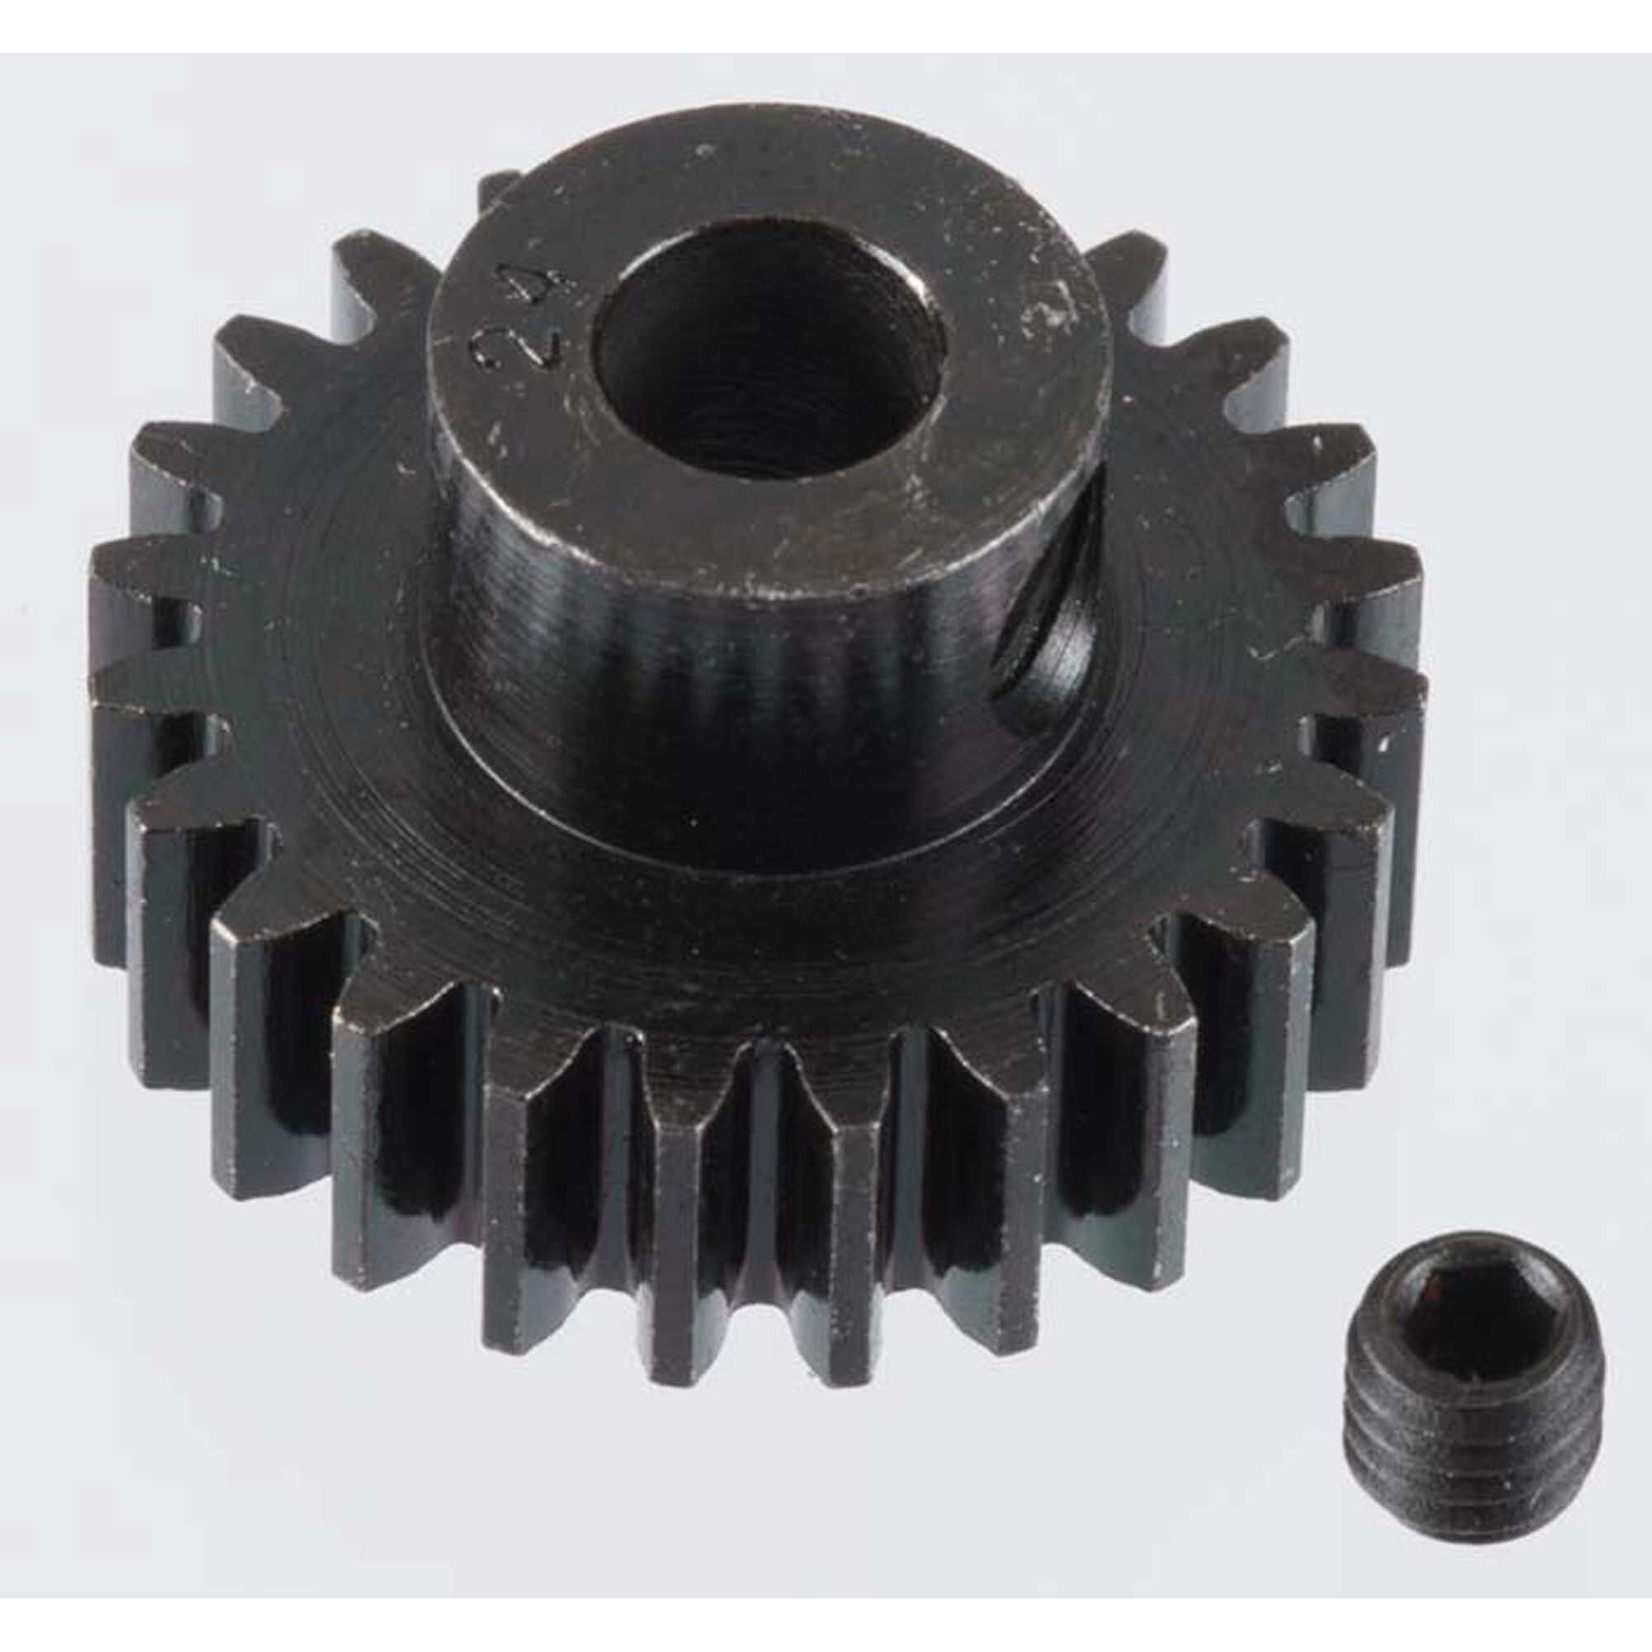 Robinson Racing Products (RRP) Extra Hard 24 Tooth Blackened Steel 32p Pinion, 5mm